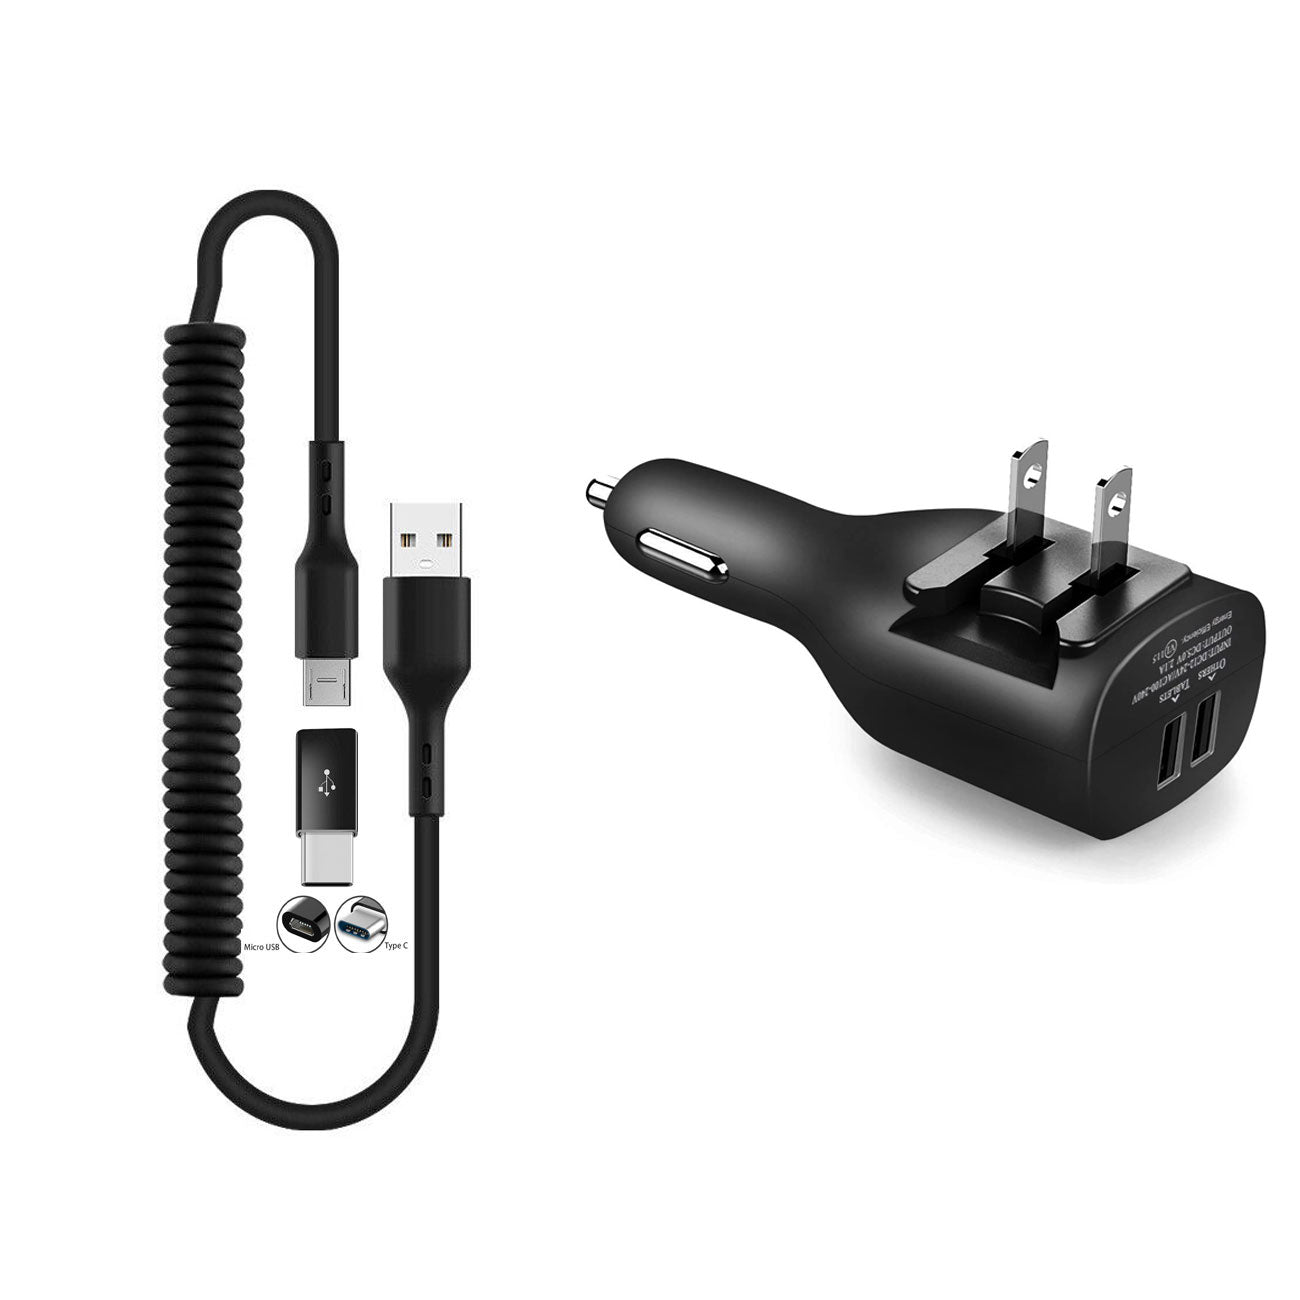 2-in-1 Car Home Charger, Black Power Wire Charger Cord Micro-USB to USB-C Adapter Coiled USB Cable - NWE96